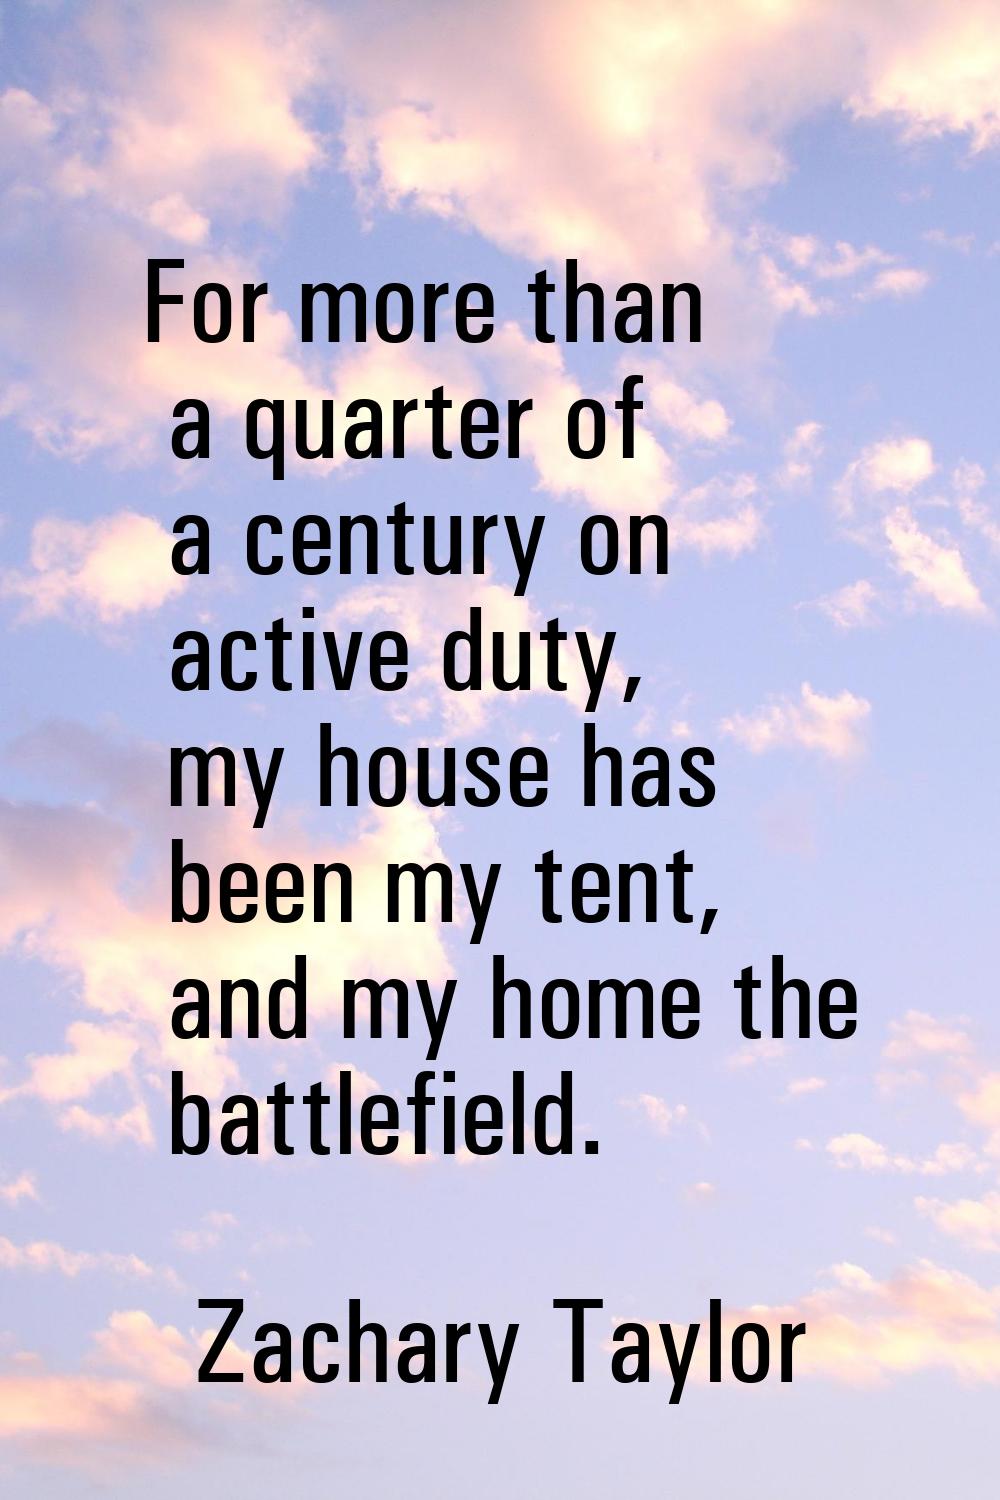 For more than a quarter of a century on active duty, my house has been my tent, and my home the bat